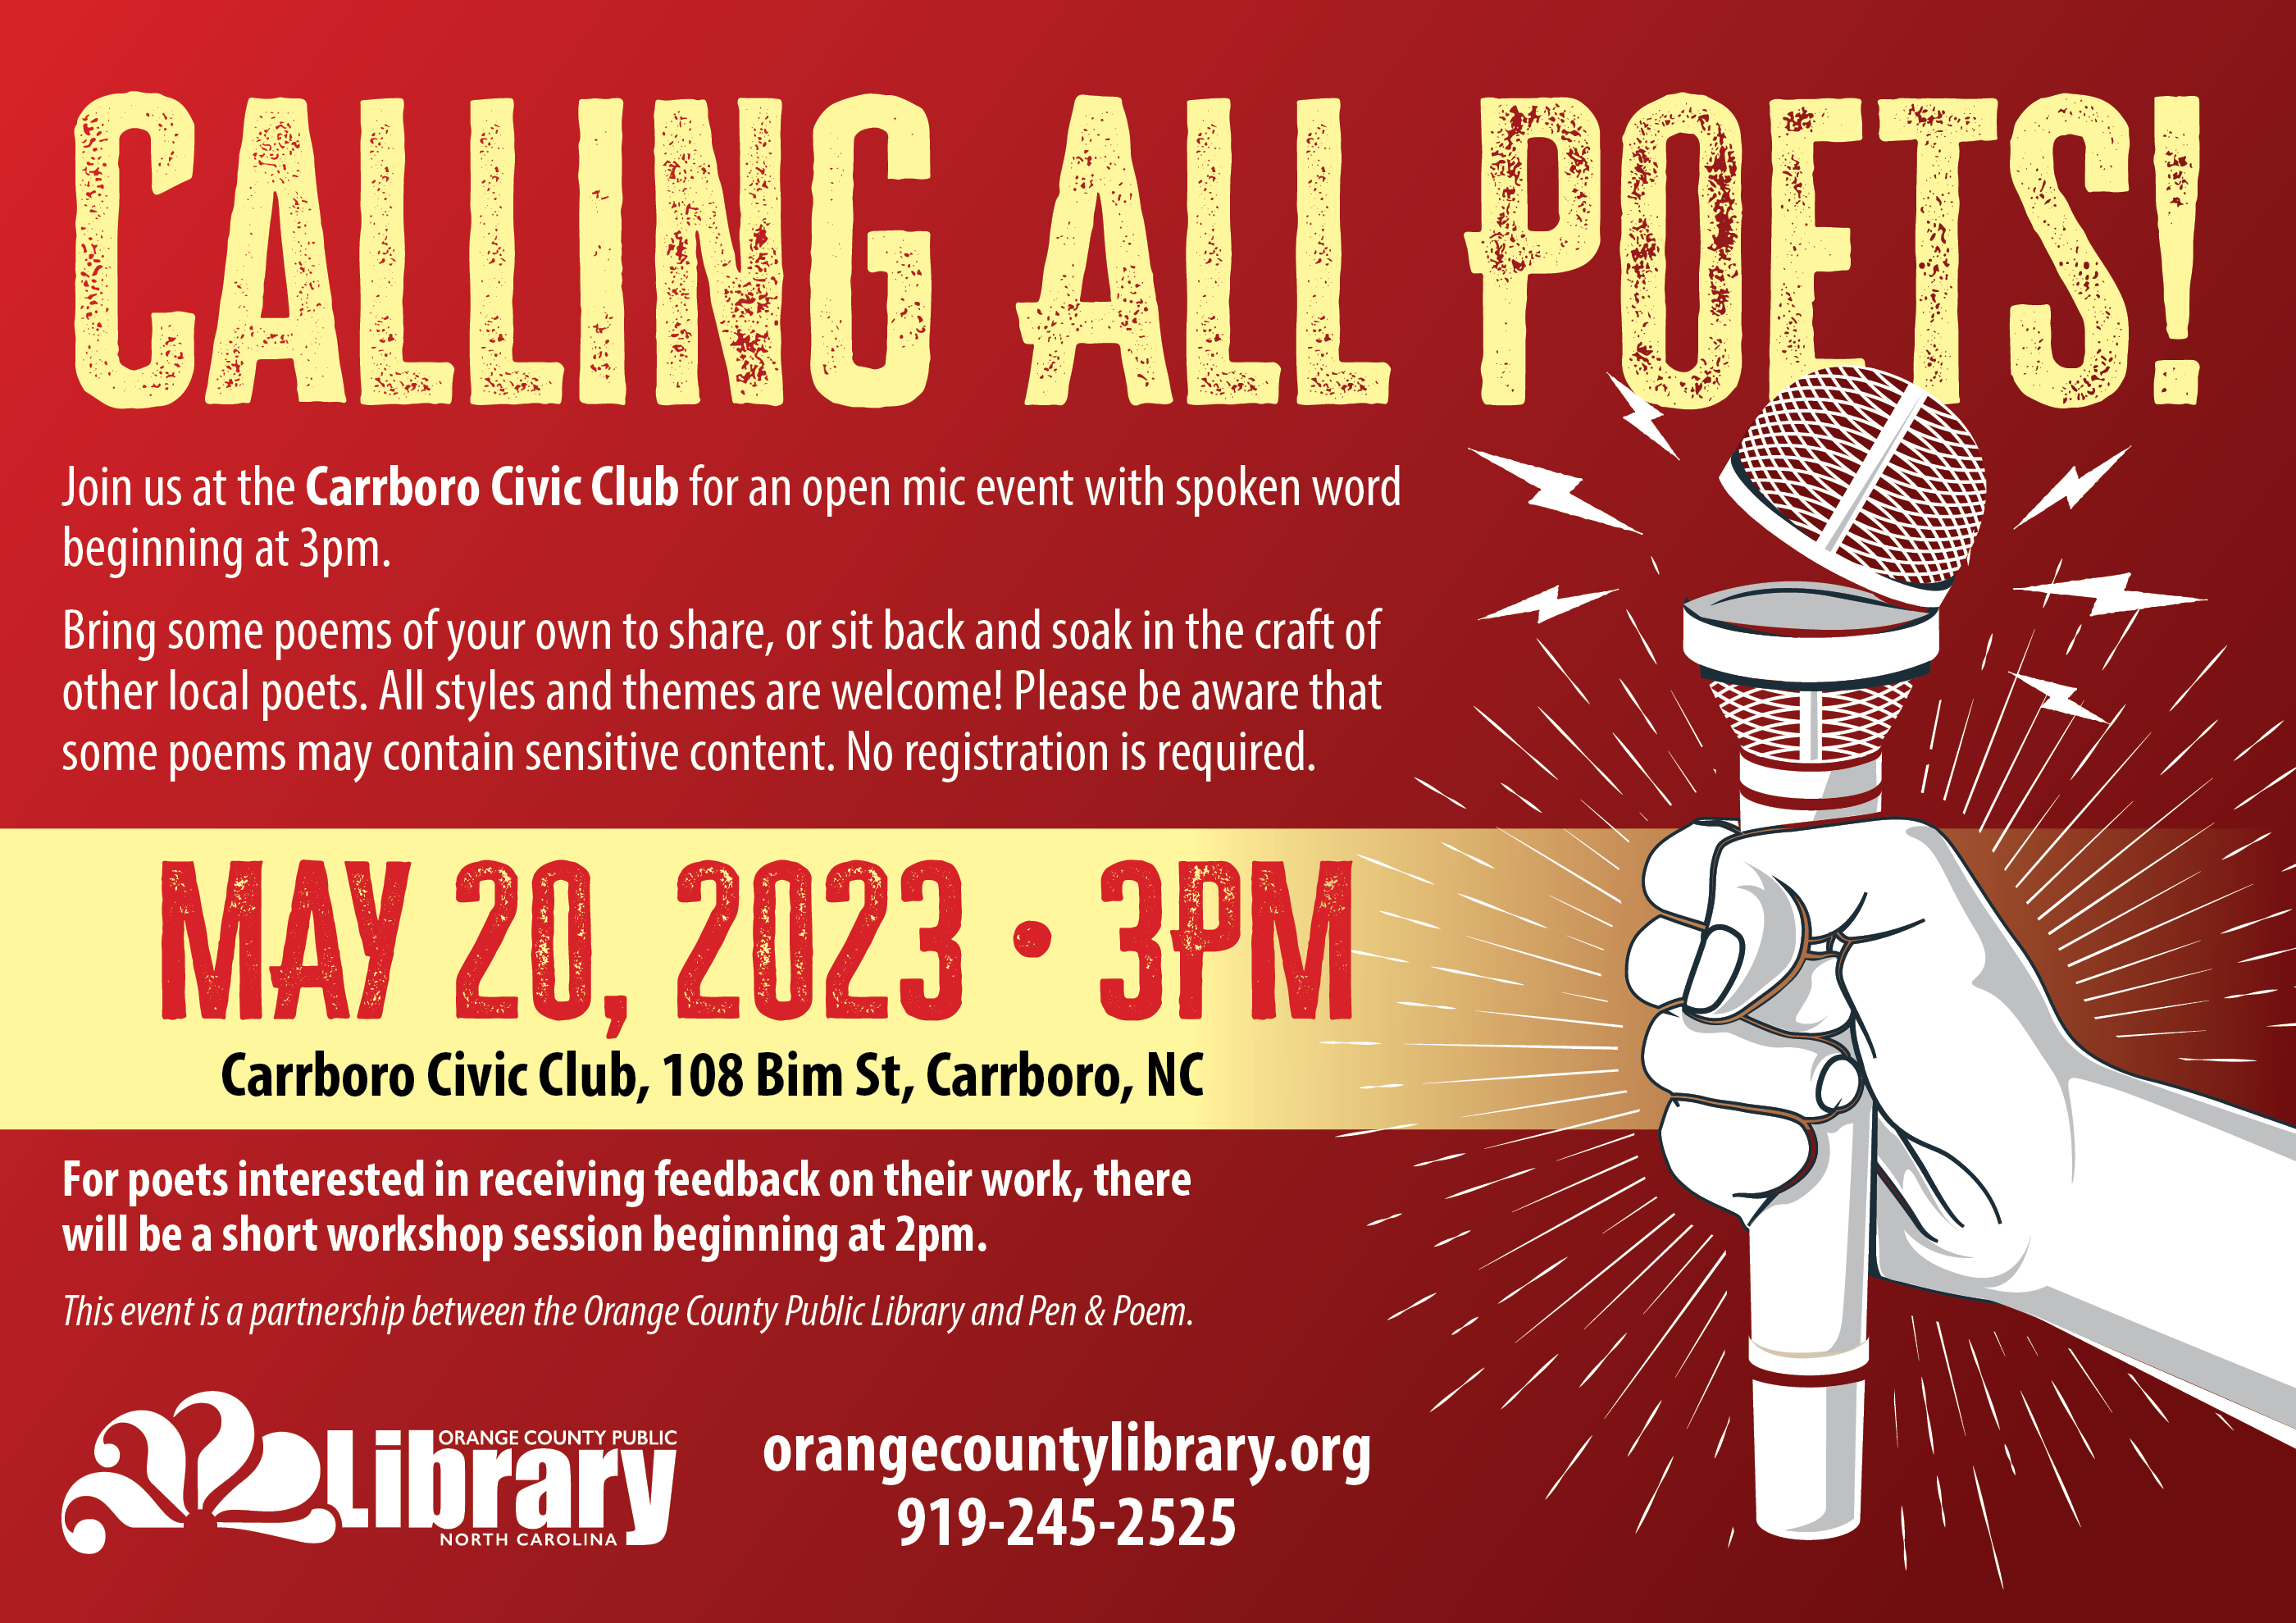 red flyer with a white hand holding a microphone. text: Calling all poets! Join us at the Carrboro Civic Club for an open mic on May 20th at 3pm, with an optional workshop beginning at 2pm. This event is done in partnership with the group Pen & Poem.